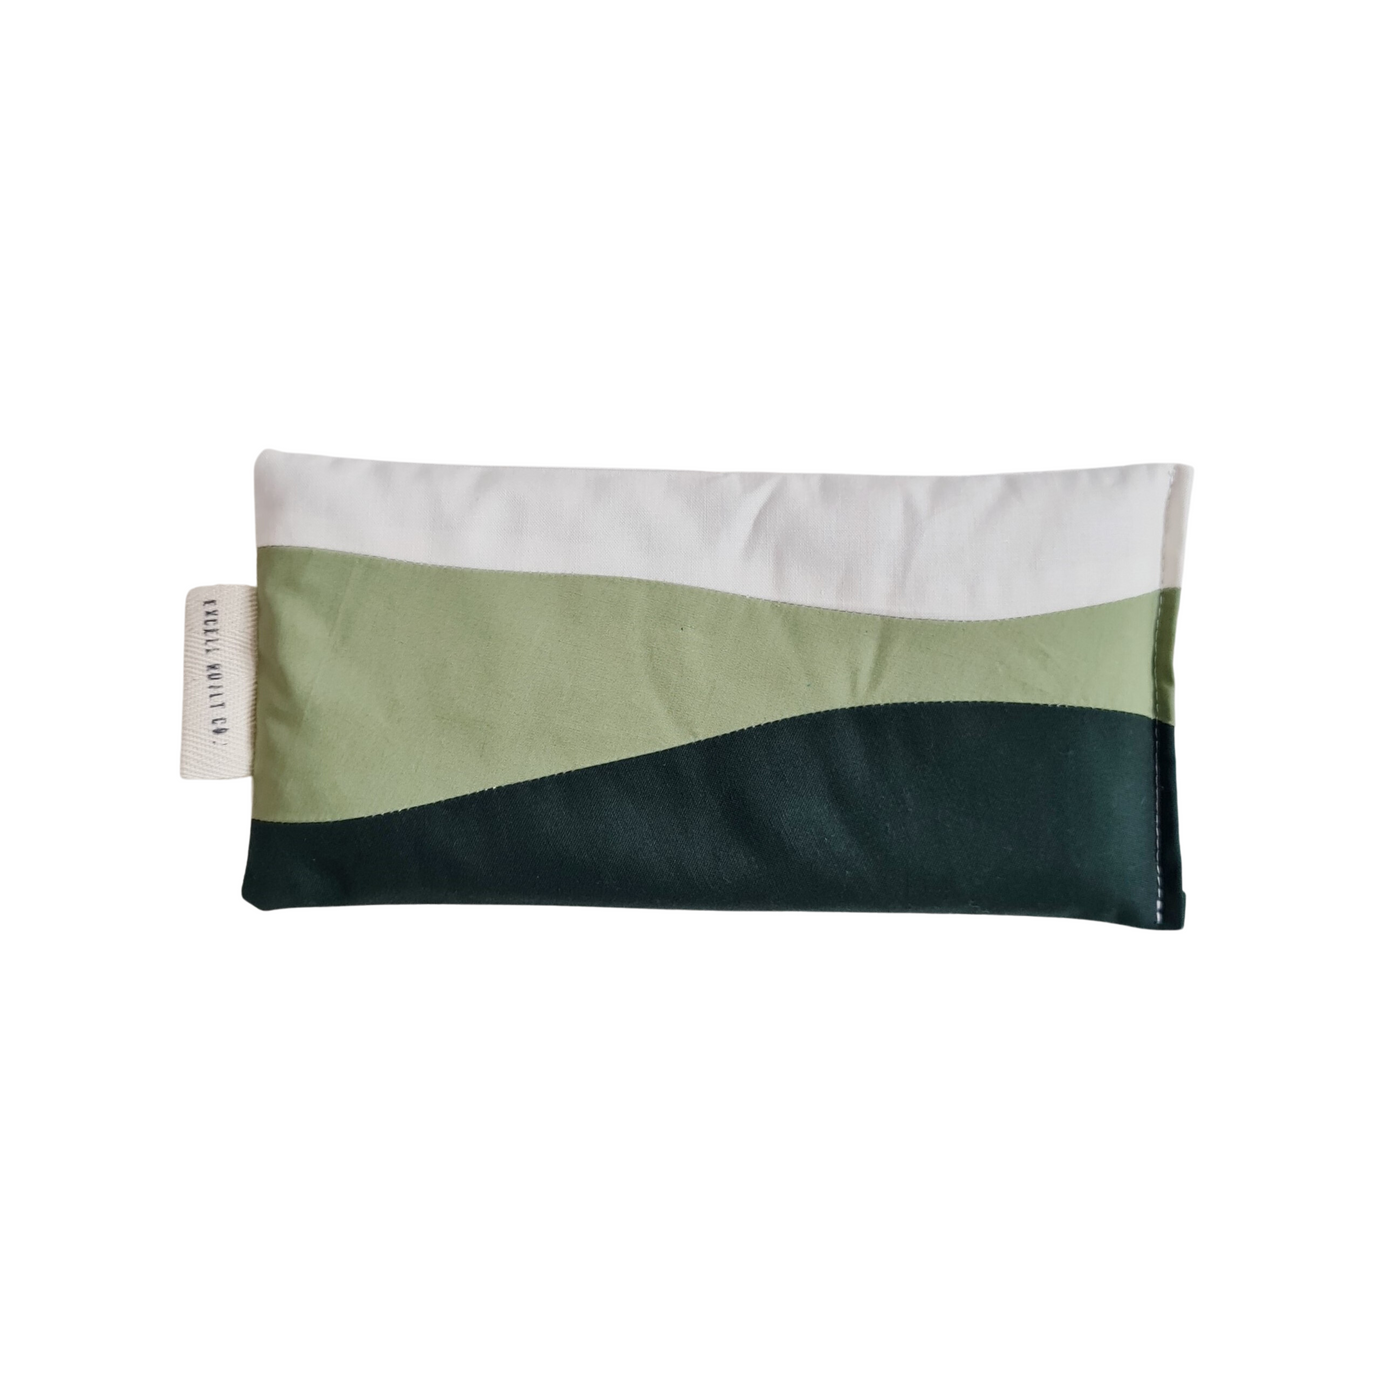 Excell Quilt Co Lavender Eye Pillow - Radical Giving